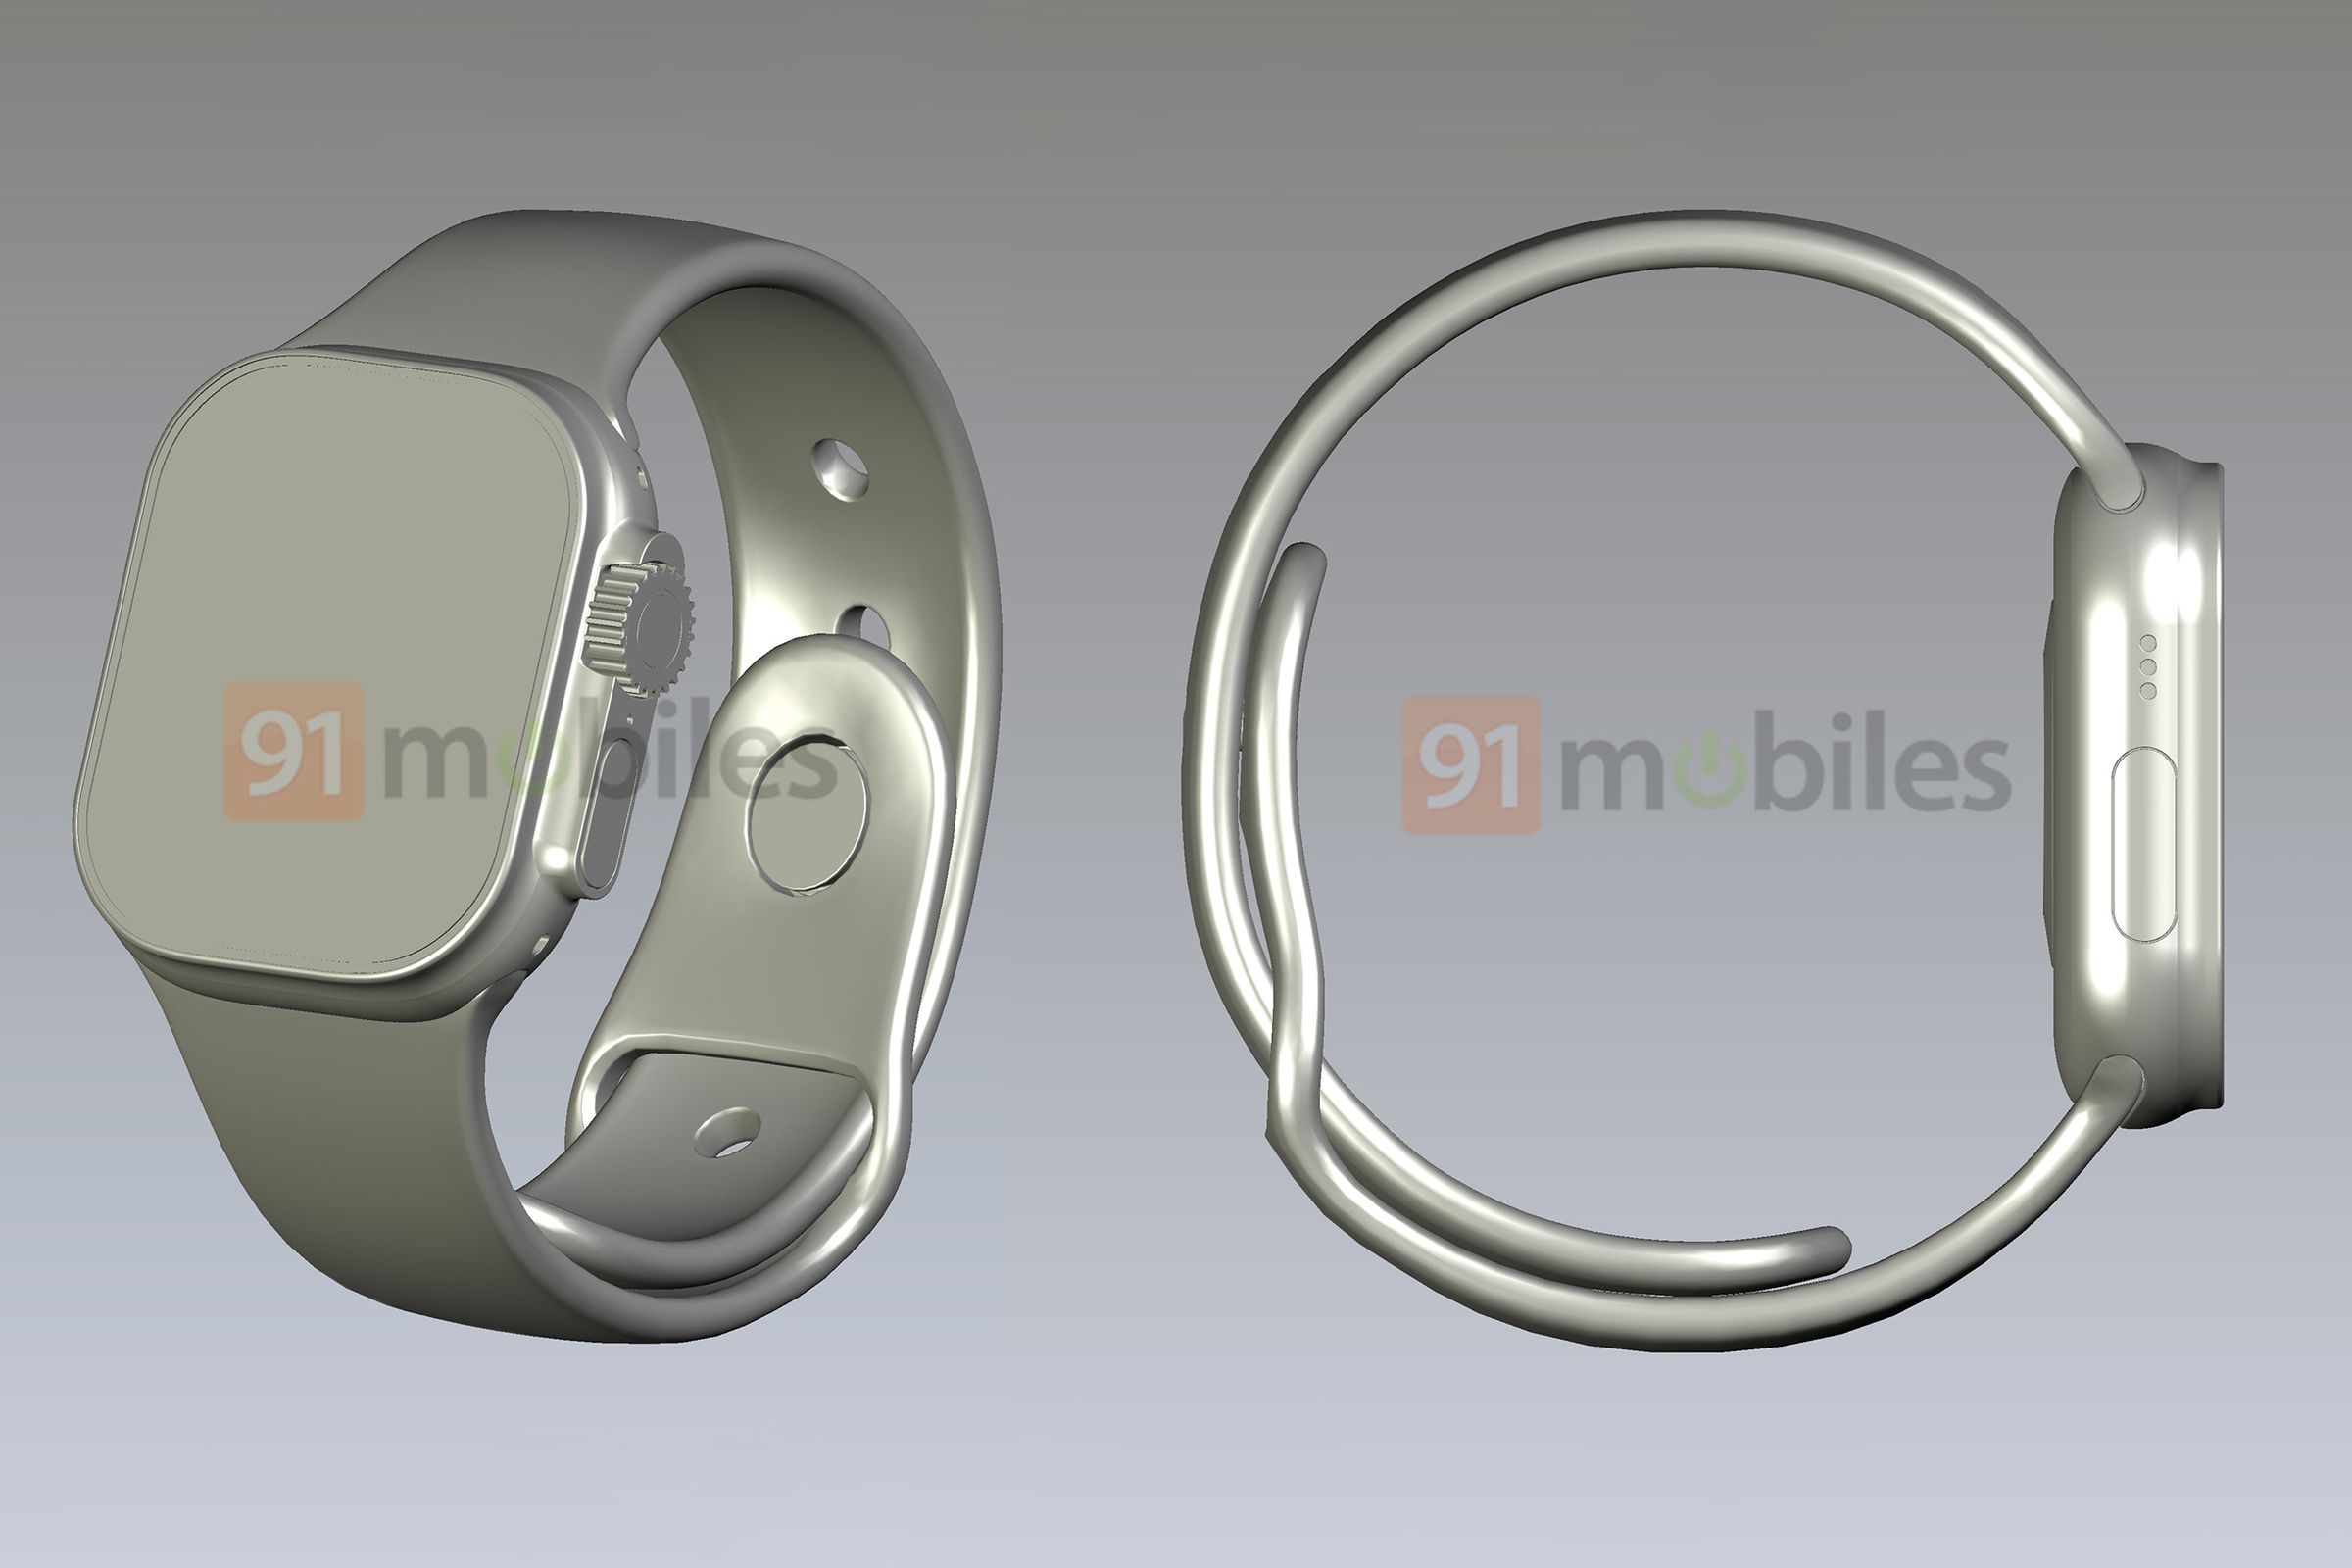 Apple Watch Pro CAD drawings showing protected Digital Crown and new button on left.